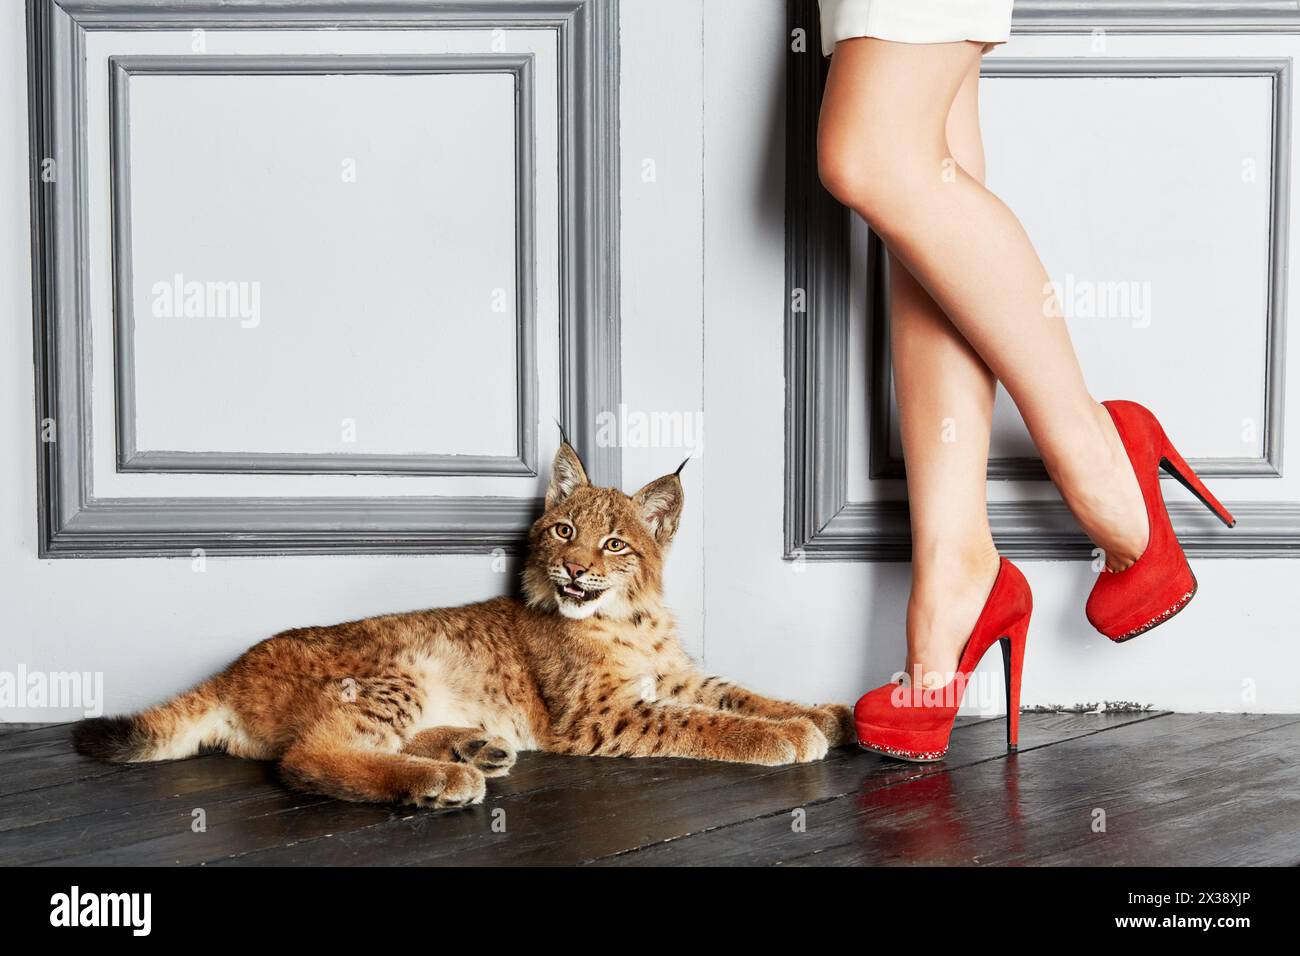 Female legs in red high-heel shoes and lynx cub, lying on floor. Stock Photo